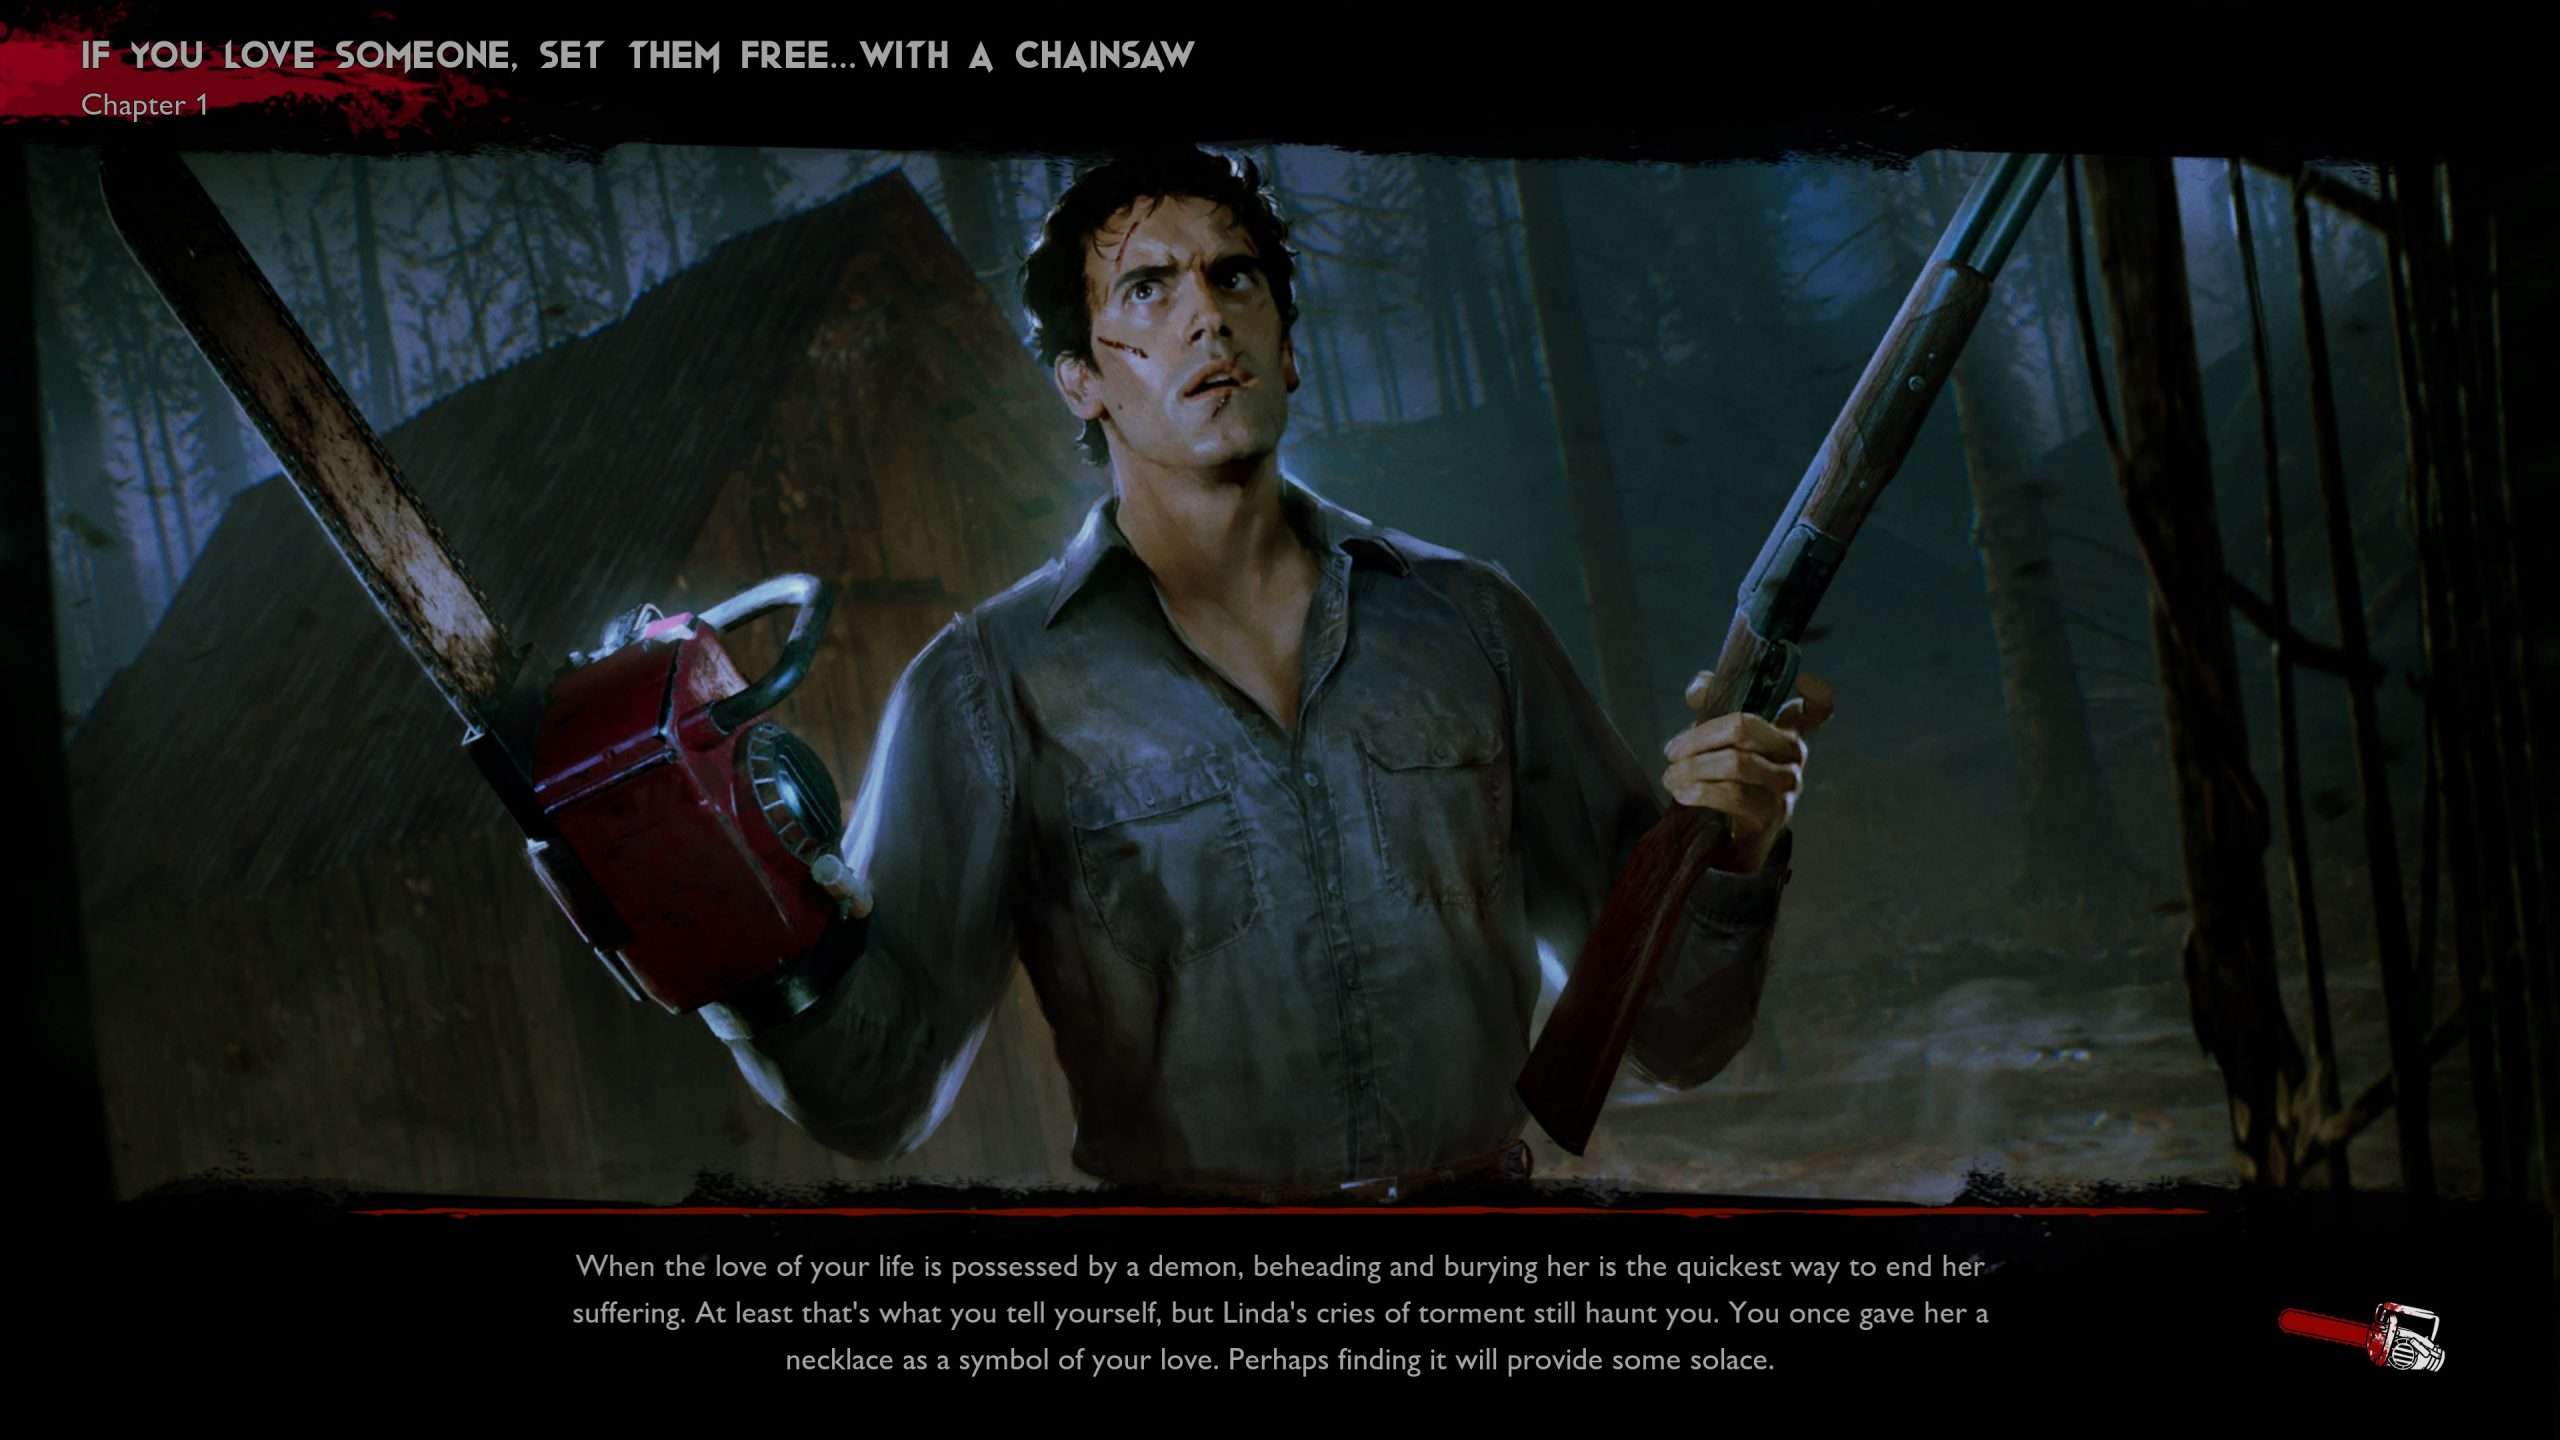 Mission 1 - If You Love Someone, Set Them Free… With a Chainsaw